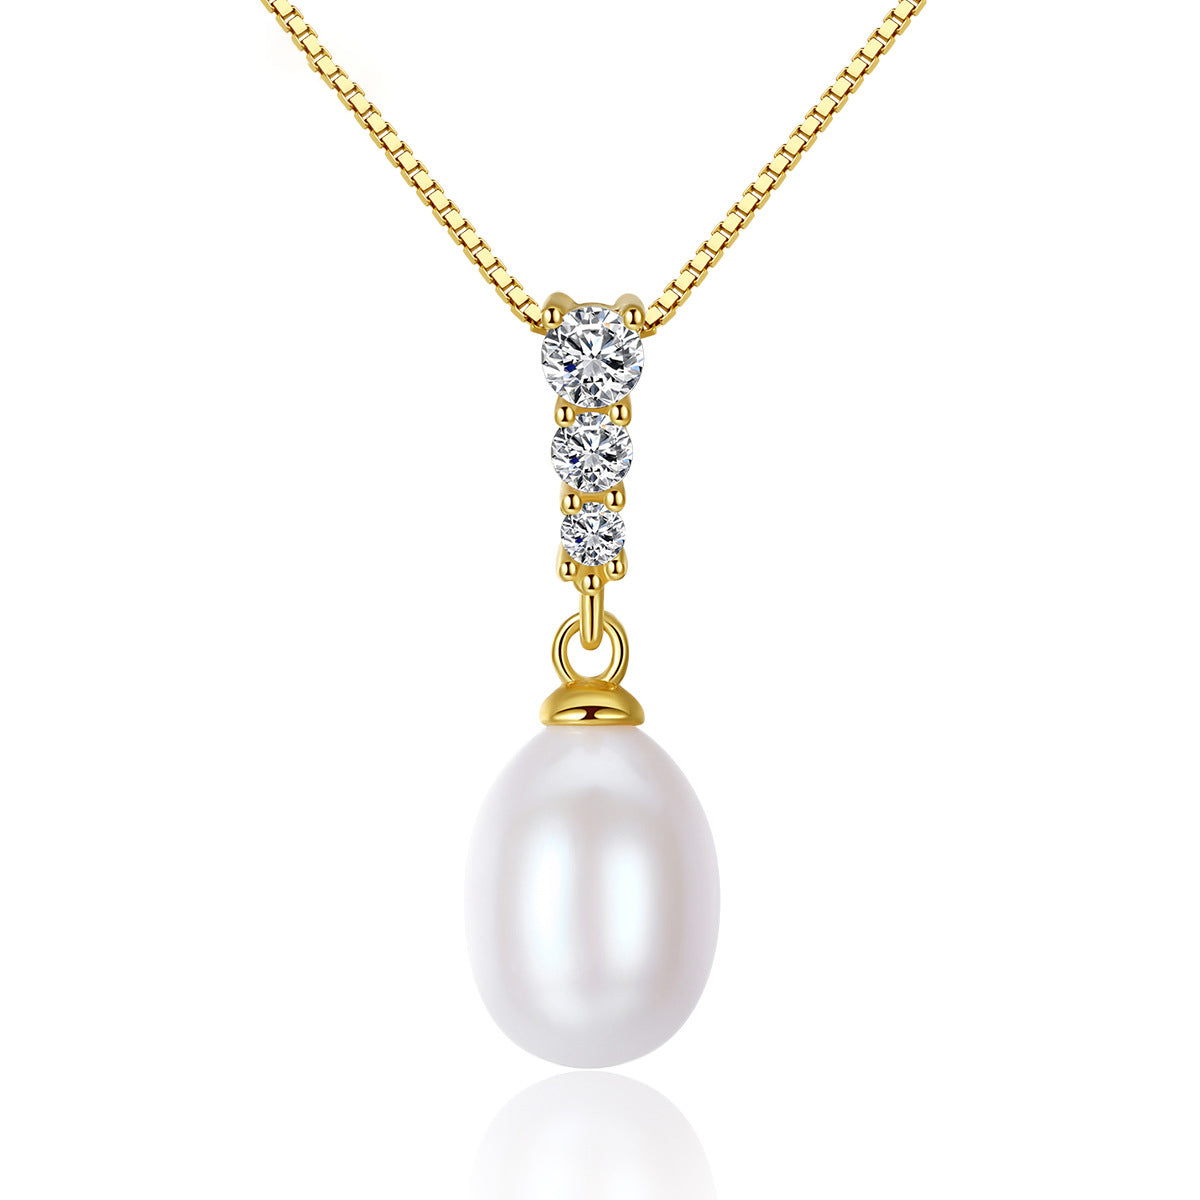 S925 Silver Freshwater Pearl Pendant Necklace Fashion Female Necklace female Necklace